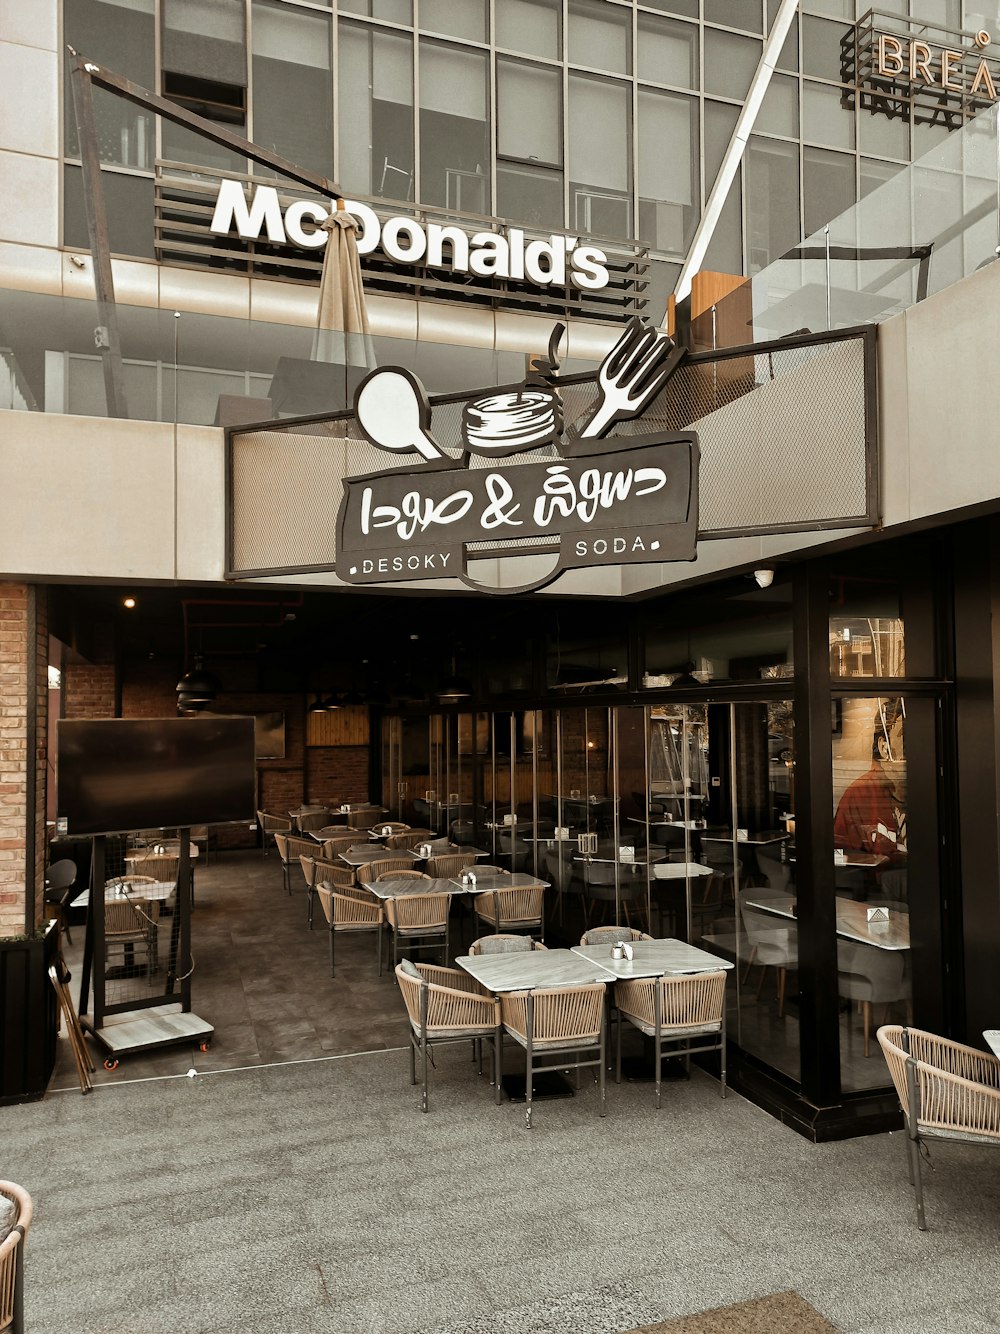 the entrance to mcdonald's restaurant in the middle of the city